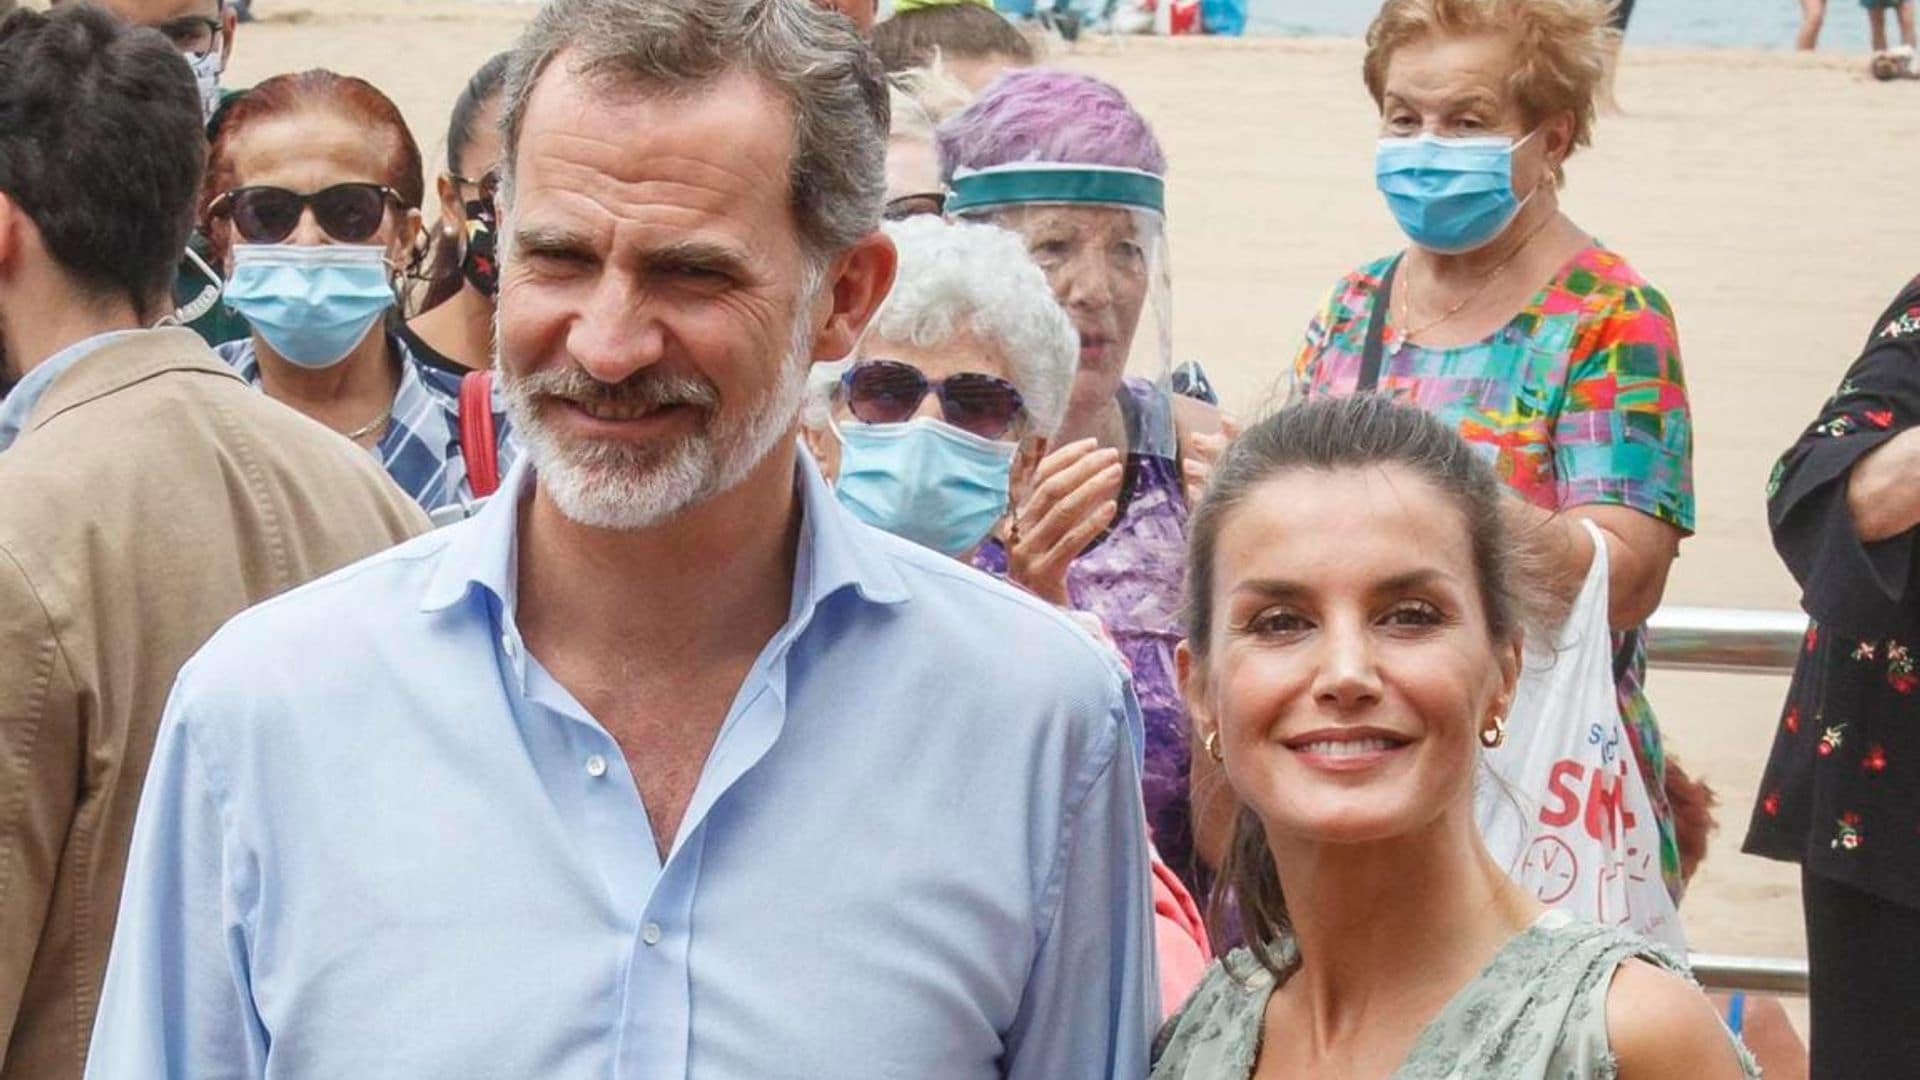 Queen Letizia looks summer-ready in affordable Zara dress for trip to the beach